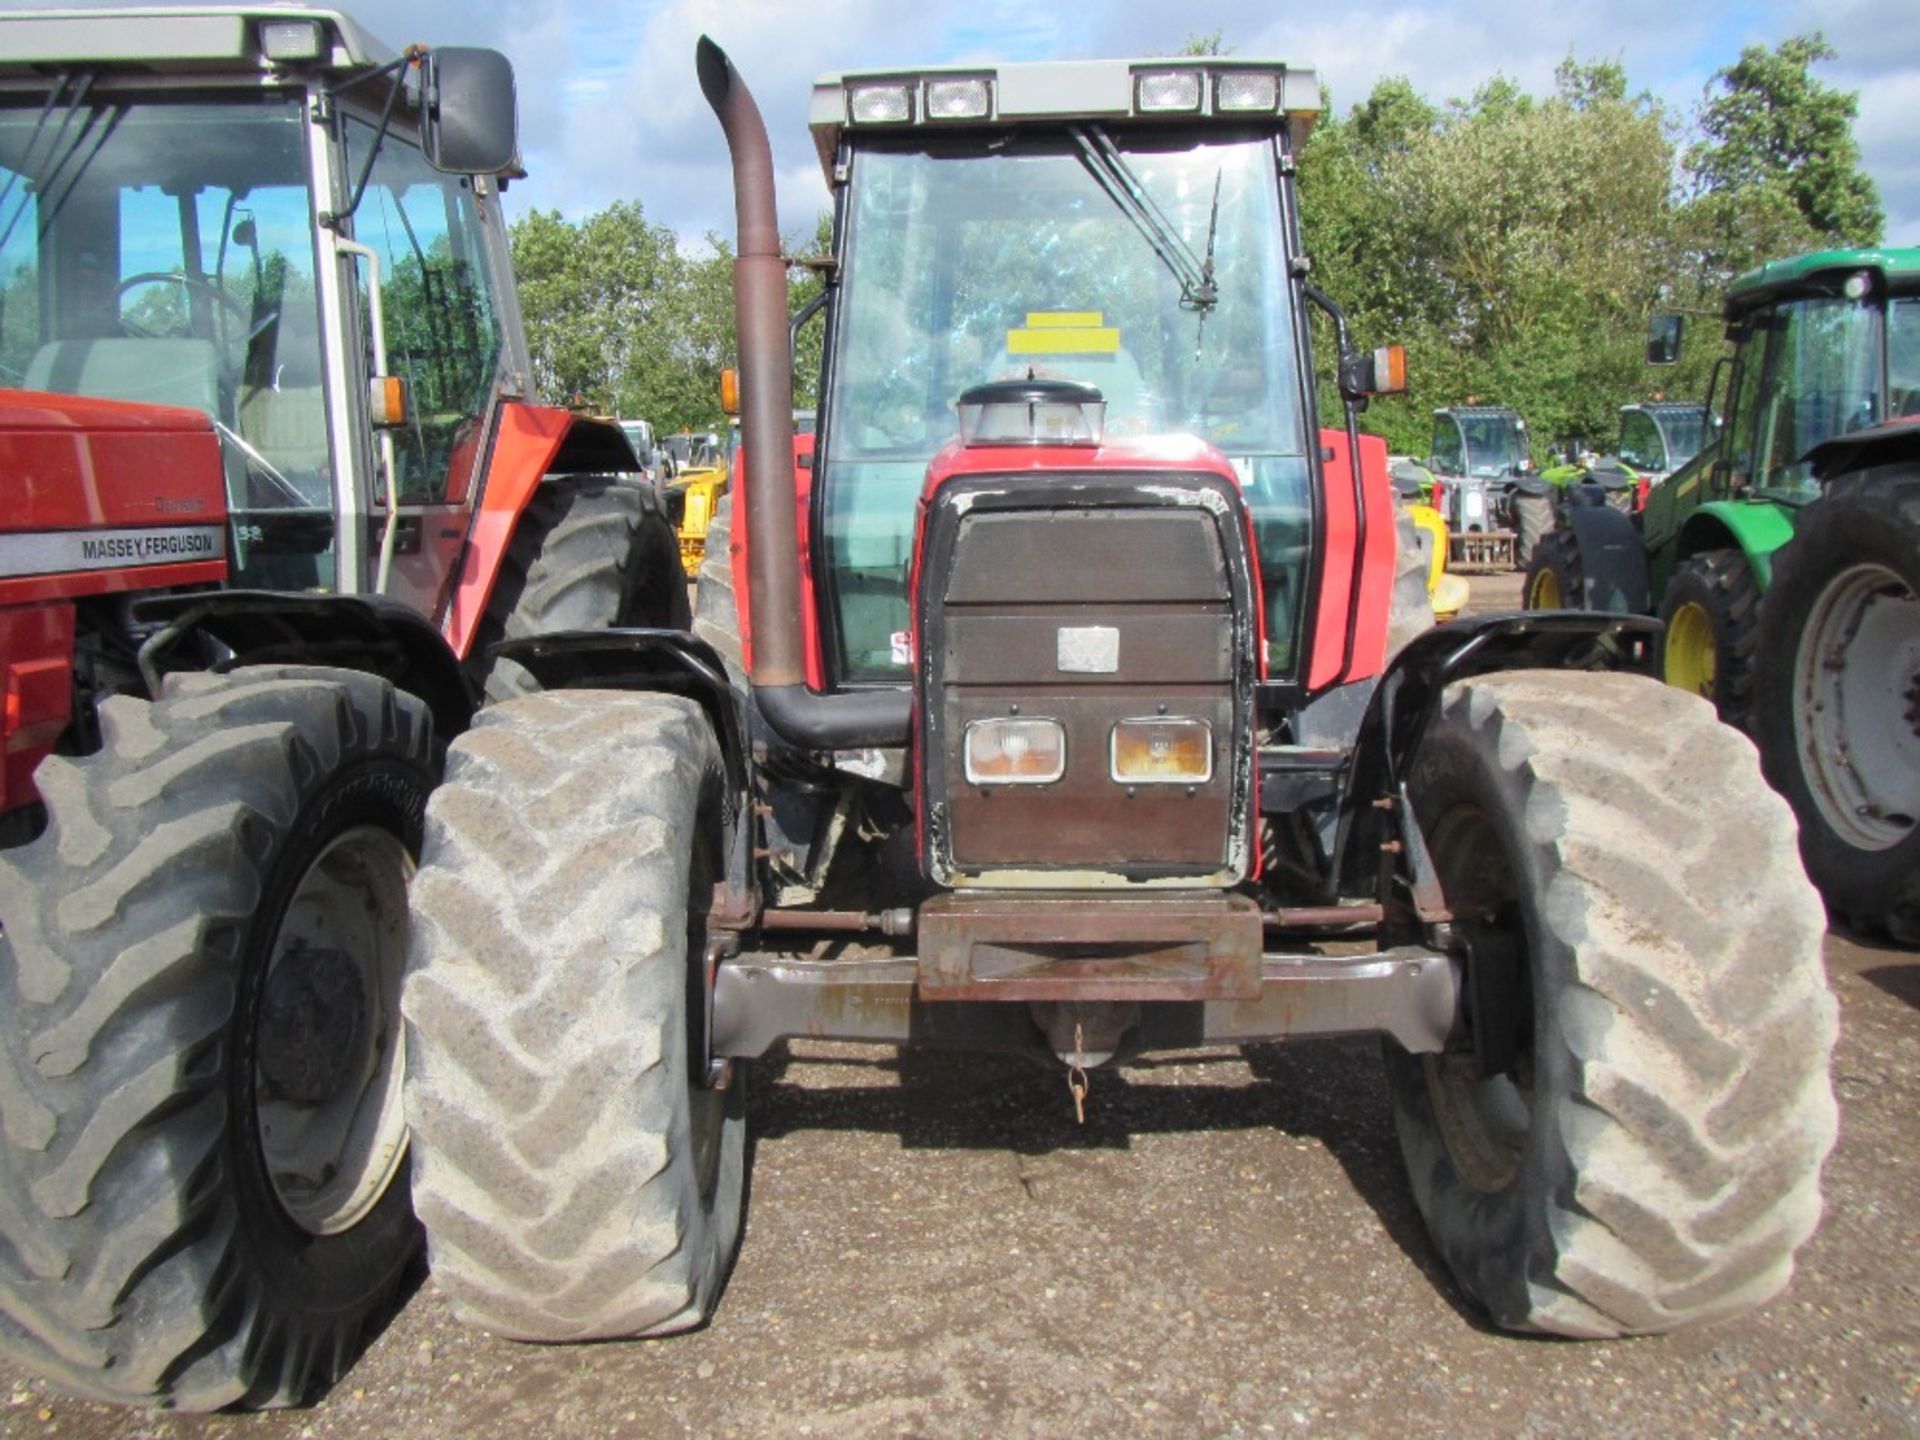 Massey Ferguson 6170 Dynashift 4wd 40k Tractor with Air Con. 5735 hrs. Reg. No. N264 JHG - Image 2 of 14